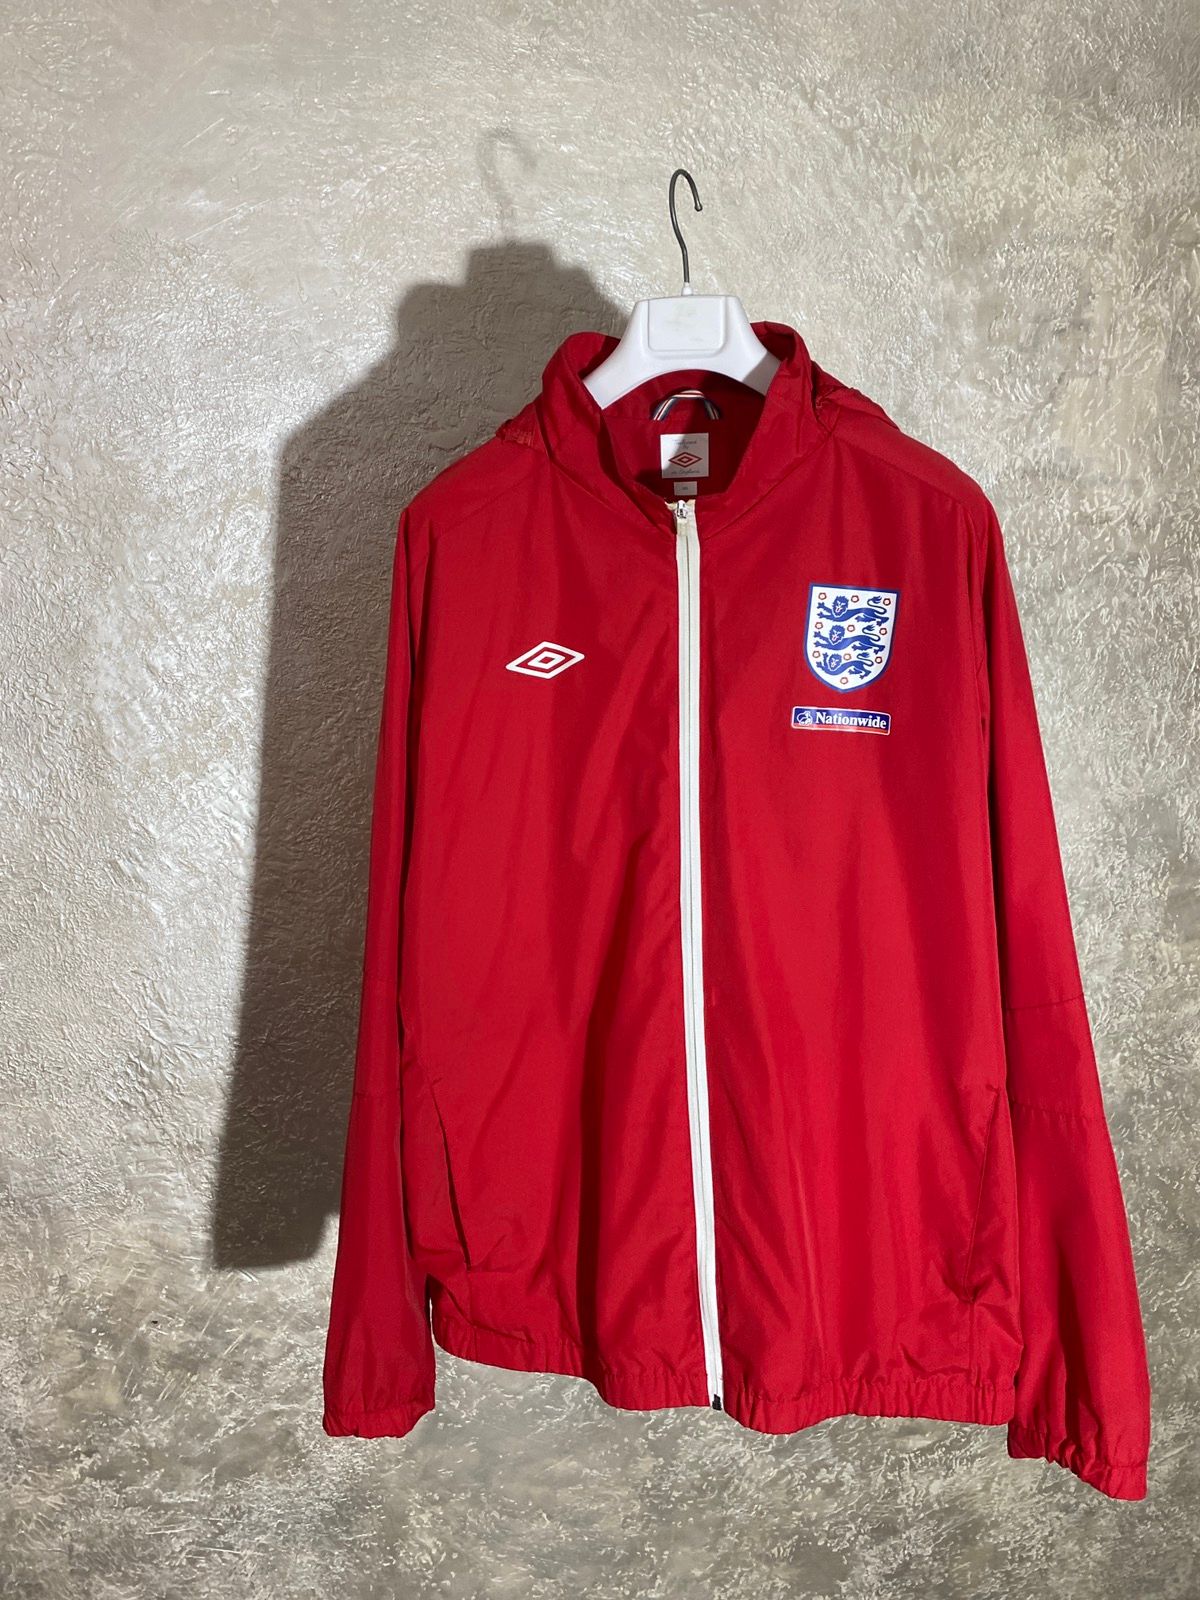 Pre-owned Soccer Jersey X Umbro England Umbro 2000s Home Football Light Jacket Blokecore Y2k In Red